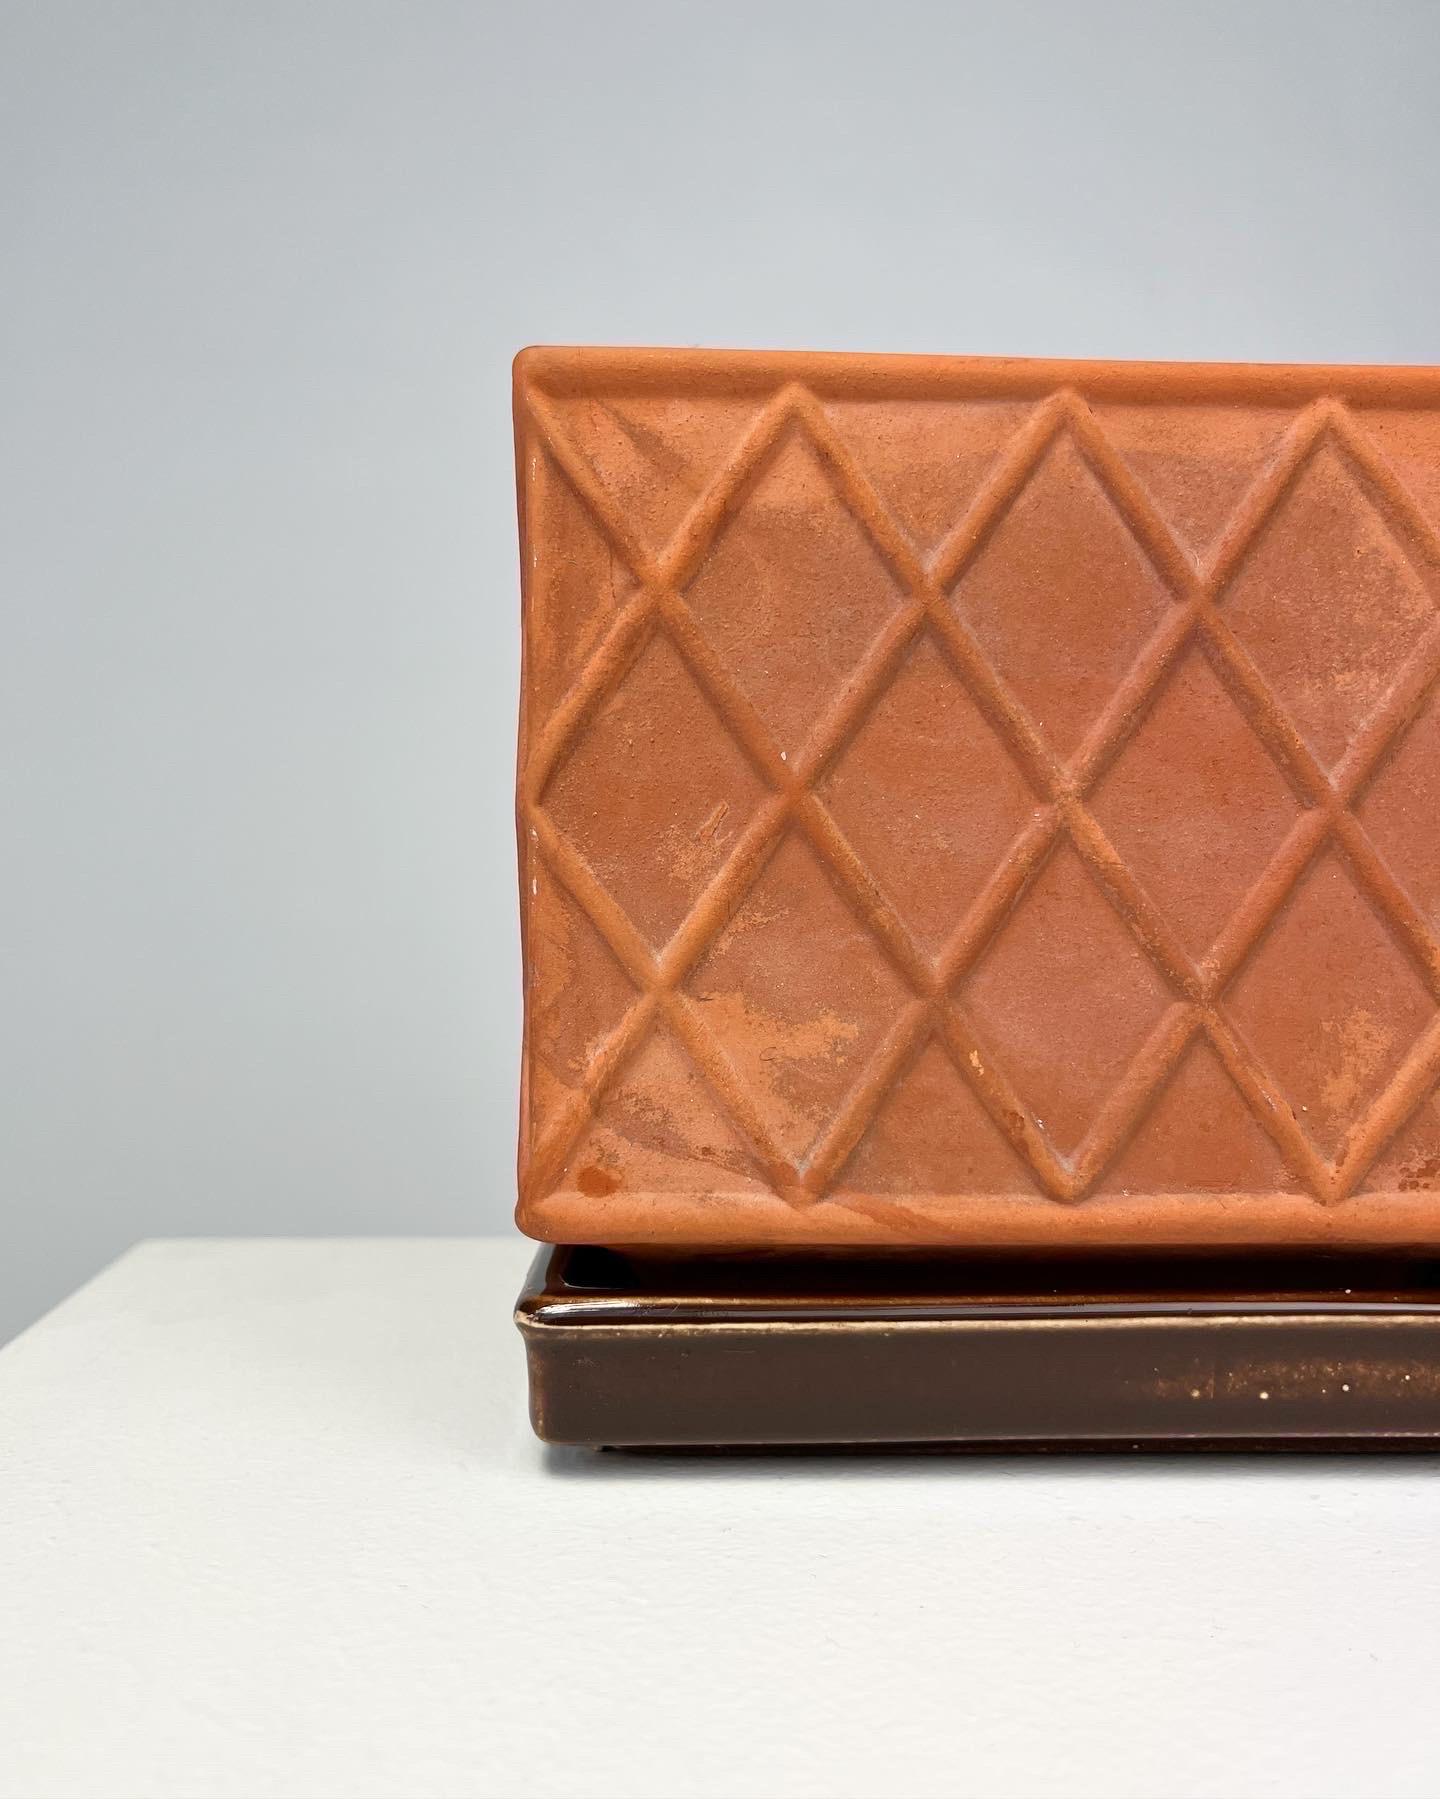 Wilhelm Kage Planter Gustavsberg Sweden Terracotta Plant Pot 1940s In Good Condition For Sale In Basel, BS